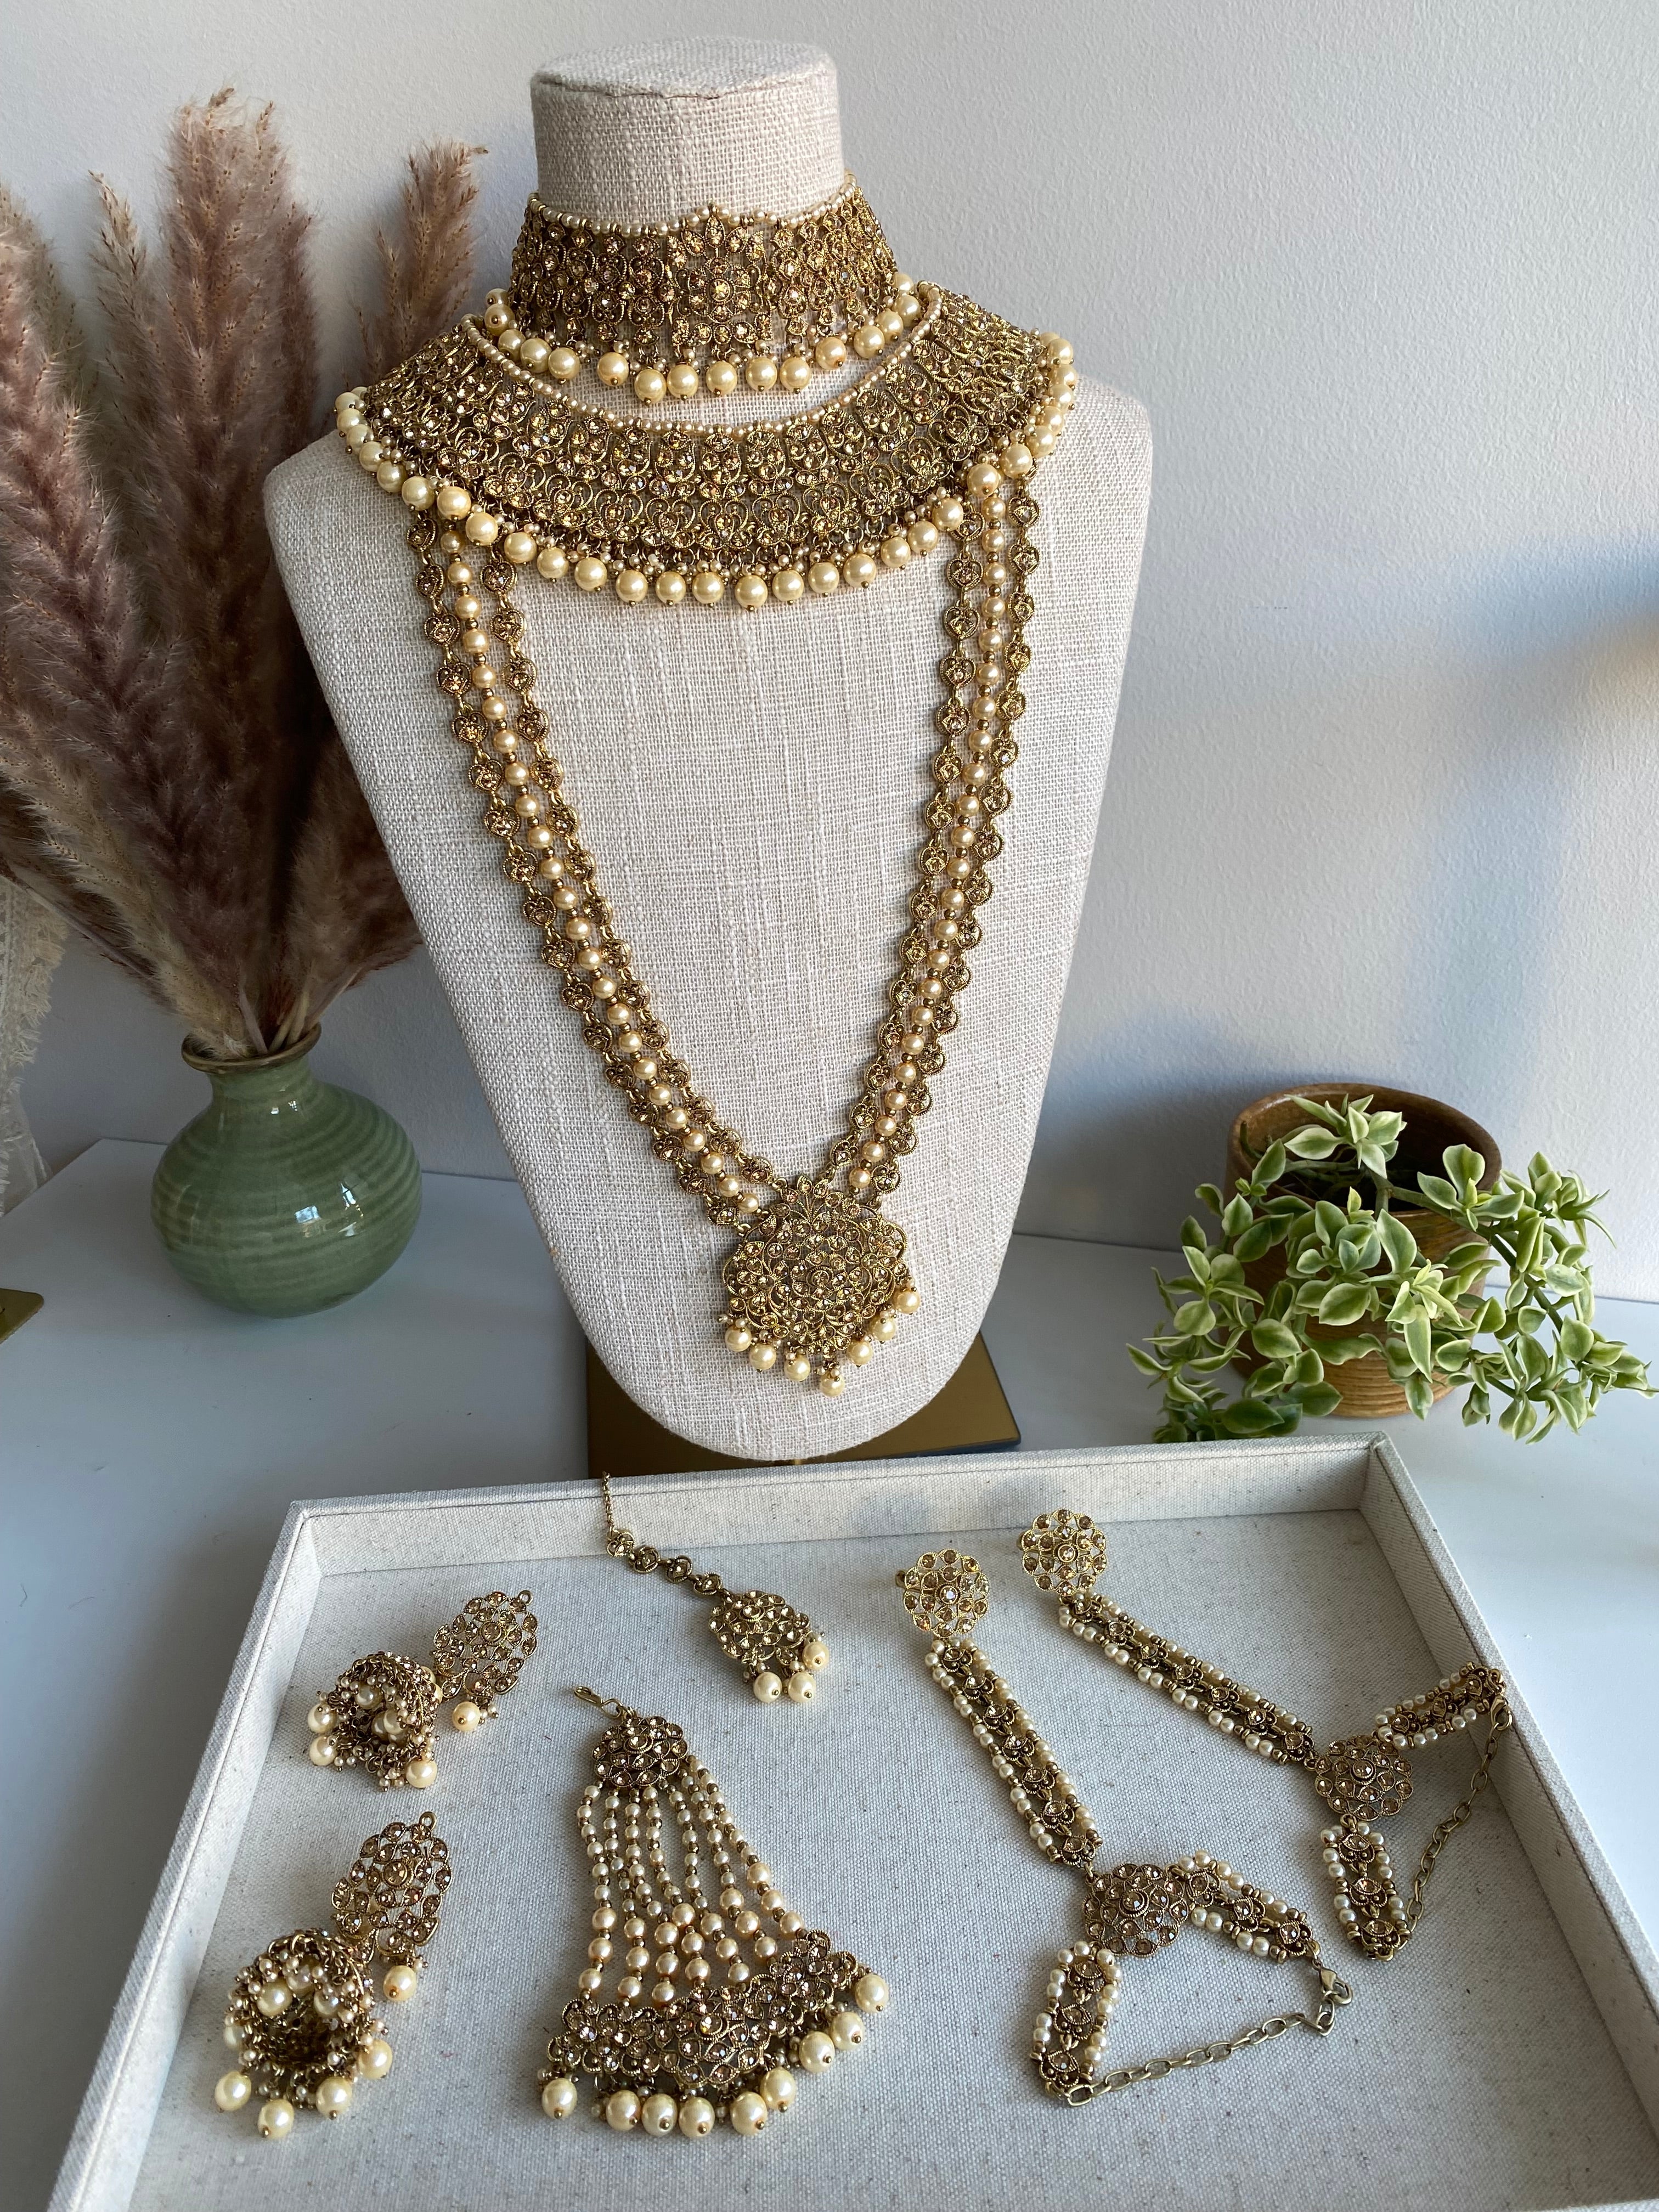 Festive Essentials - Introduces the Amira Bridal Necklace, a stunning piece with an antique gold or silver base and exquisite Polki stones adorned with captivating color beads. Don't see the color you like? Contact us on whatsapp at +1(313)727.1045 for custom options.